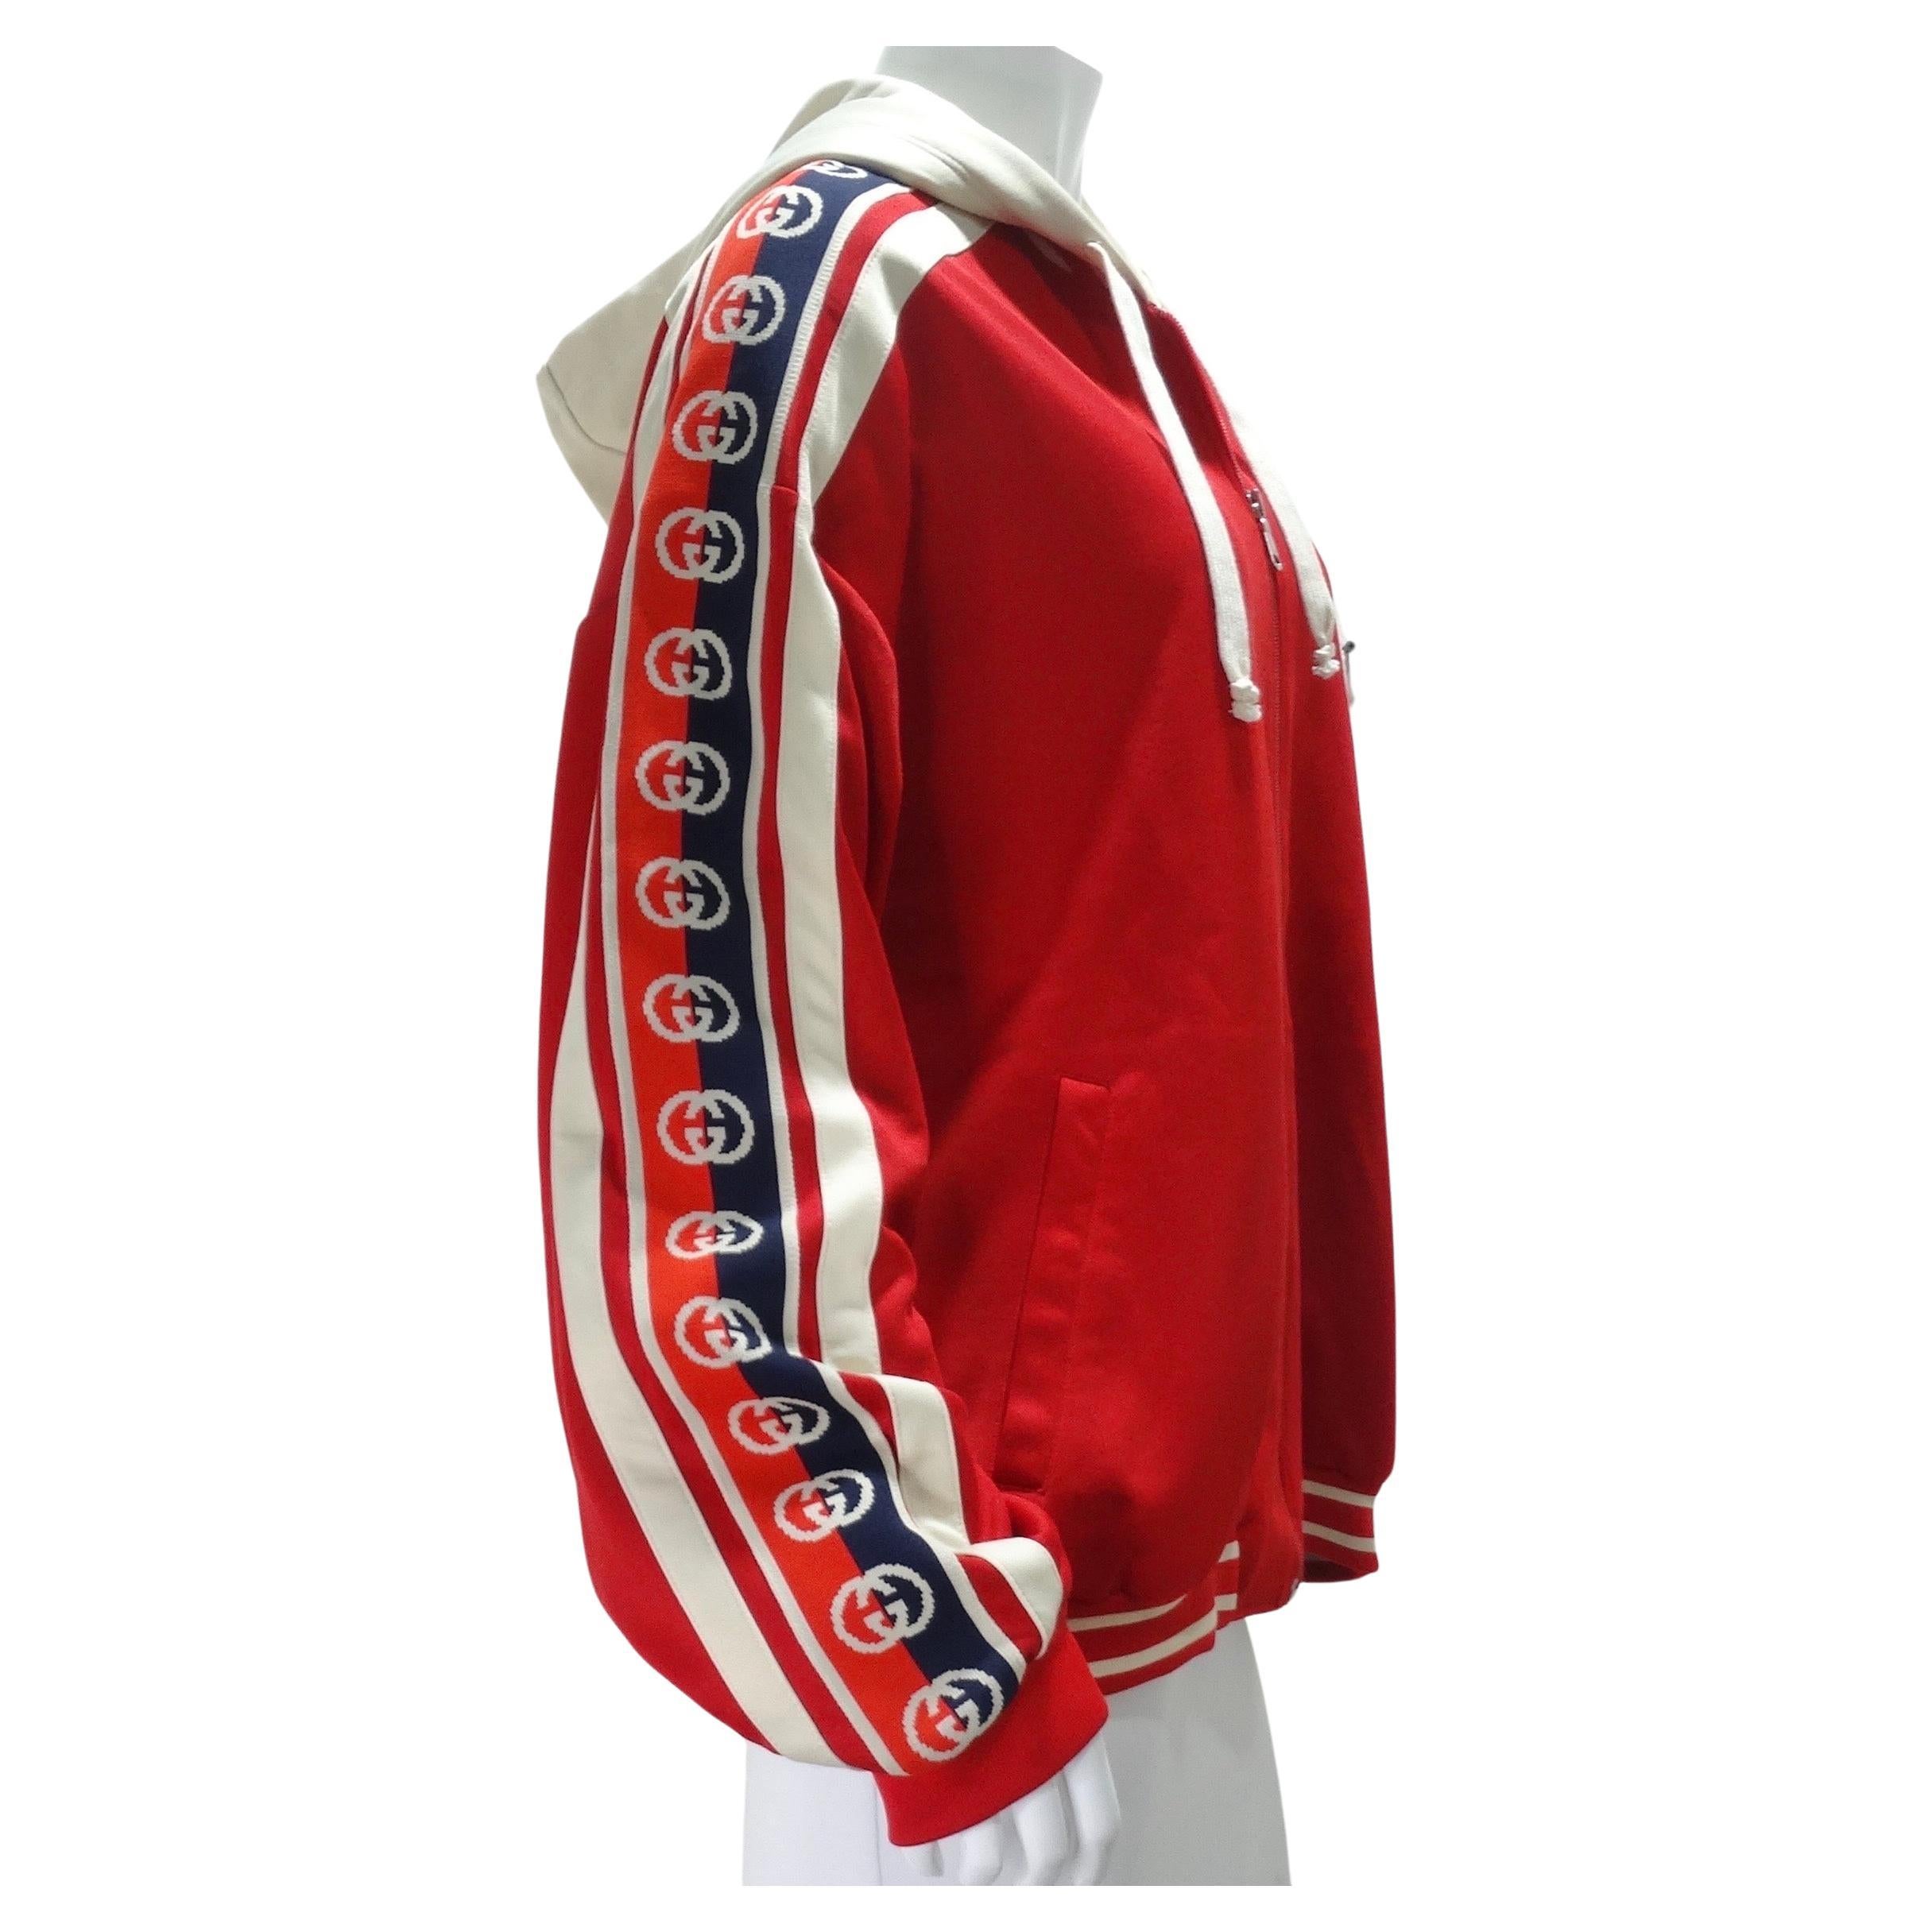 This Gucci zip-up hoodie is going to become your next go-to piece to throw on over any look! Super comfortable and versatile Gucci jacket in the most vibrant cherry red with red and white accents. Featuring a center zipper, side pockets and a